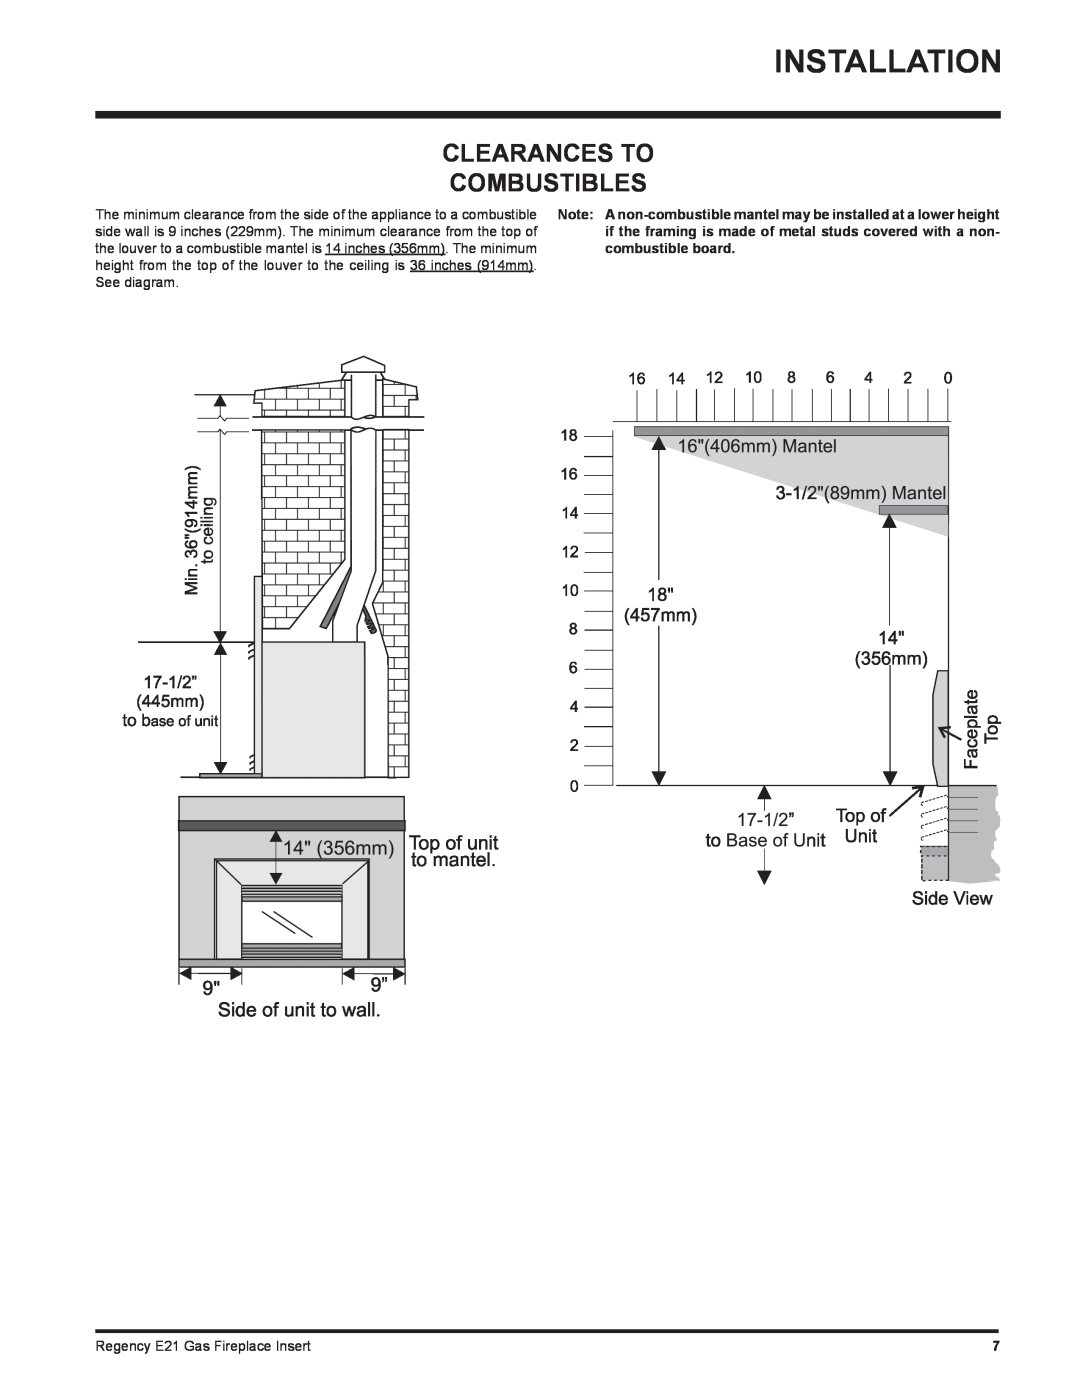 Regency E21-NG1, E21-LP1 installation manual Installation, Clearances To Combustibles, combustible board 